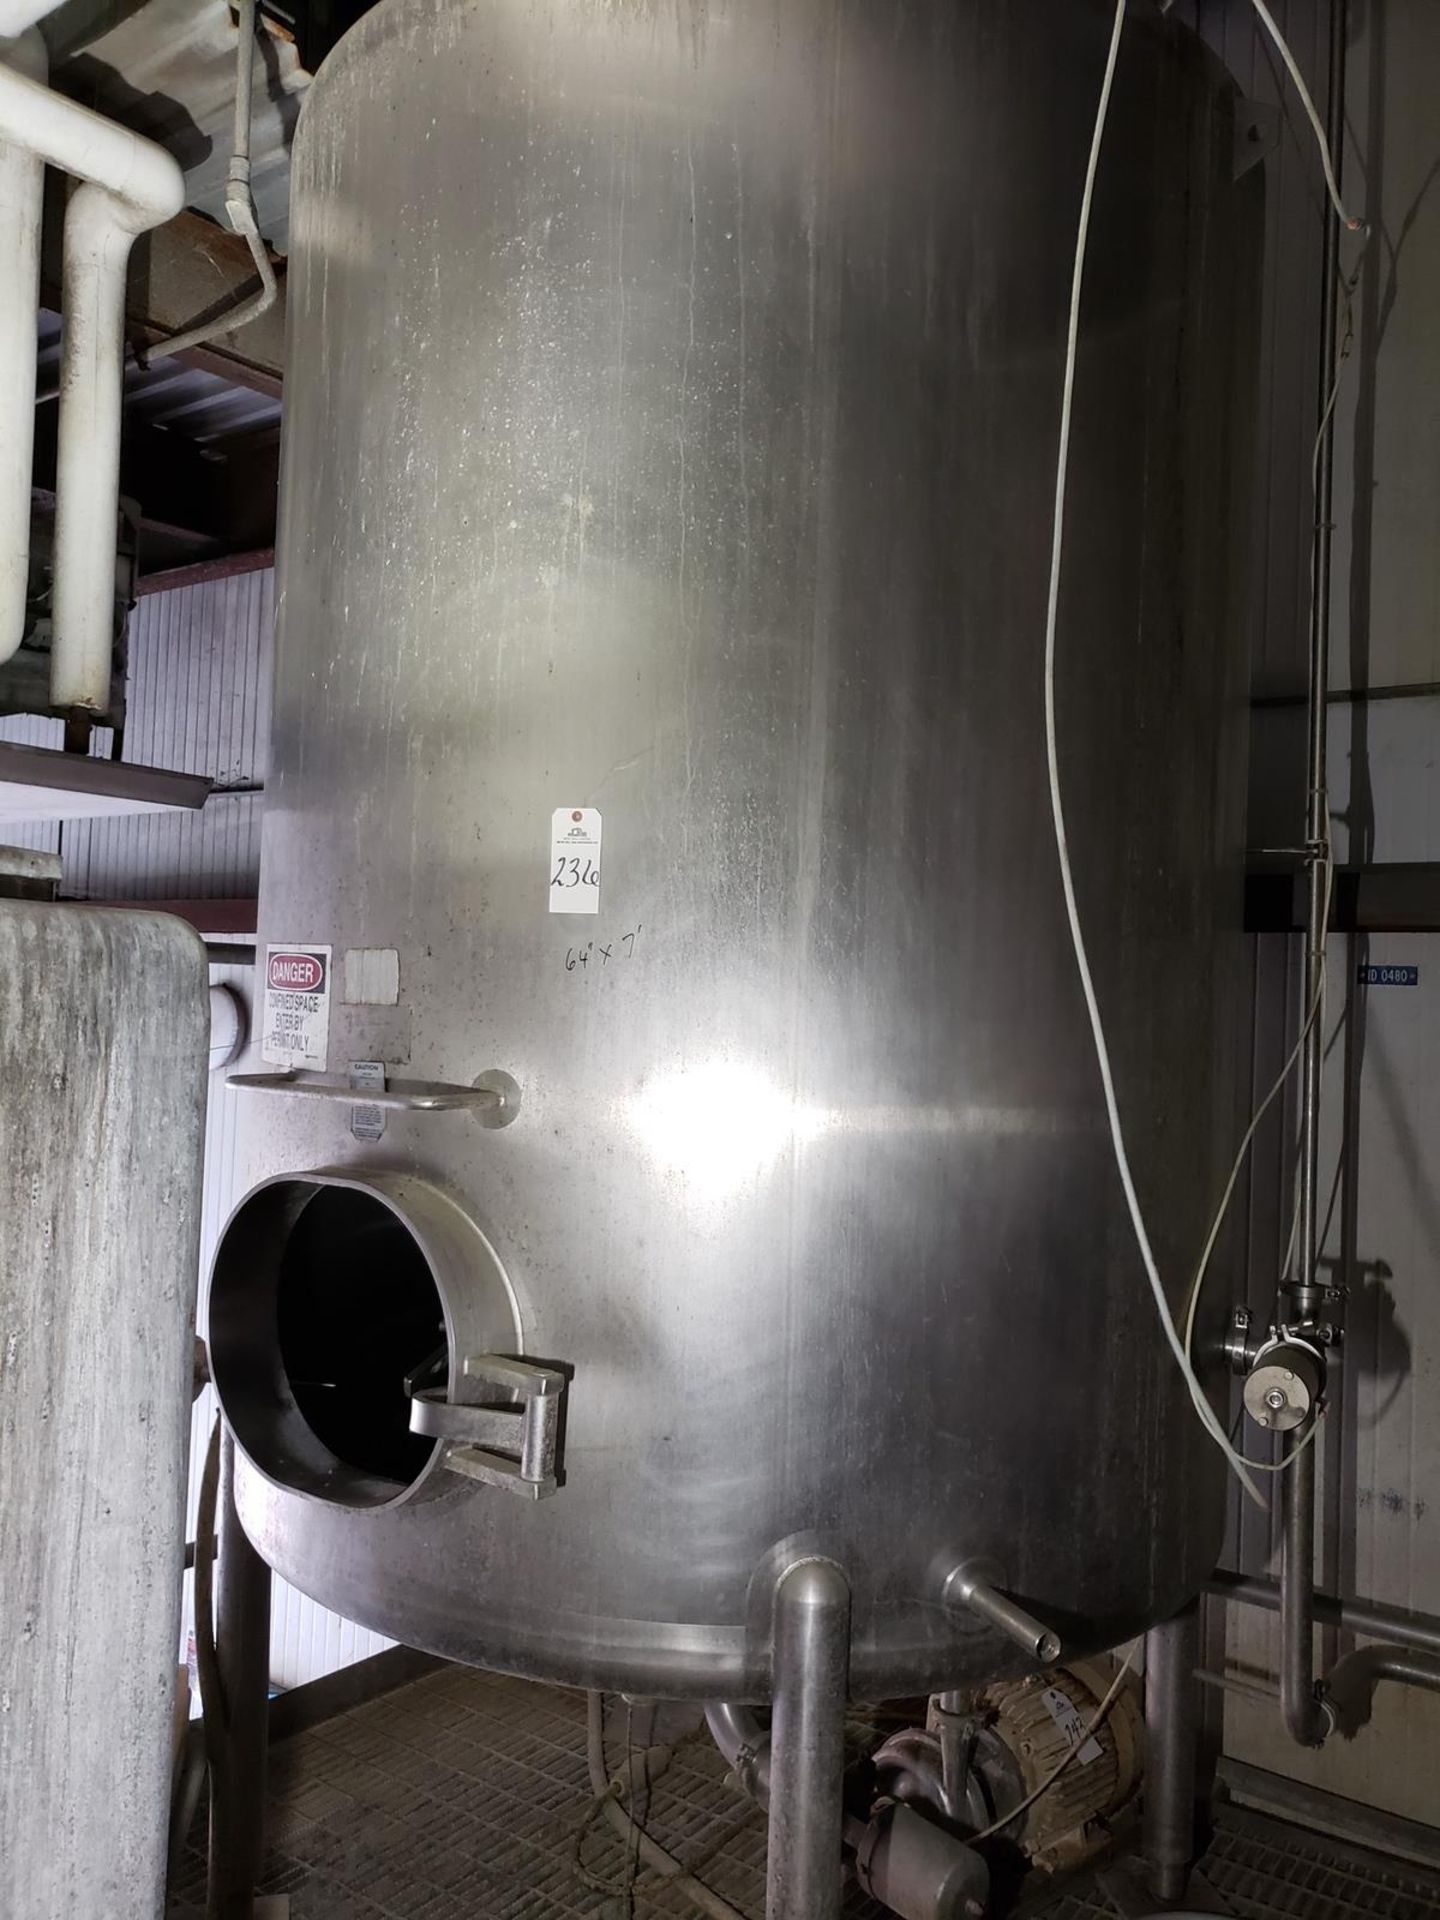 Cherry Burrell 1,000 Gallon Stainless Steel Mix Tank, (64" X 7' Inside), S/N E-3 | Rig Fee: $1200